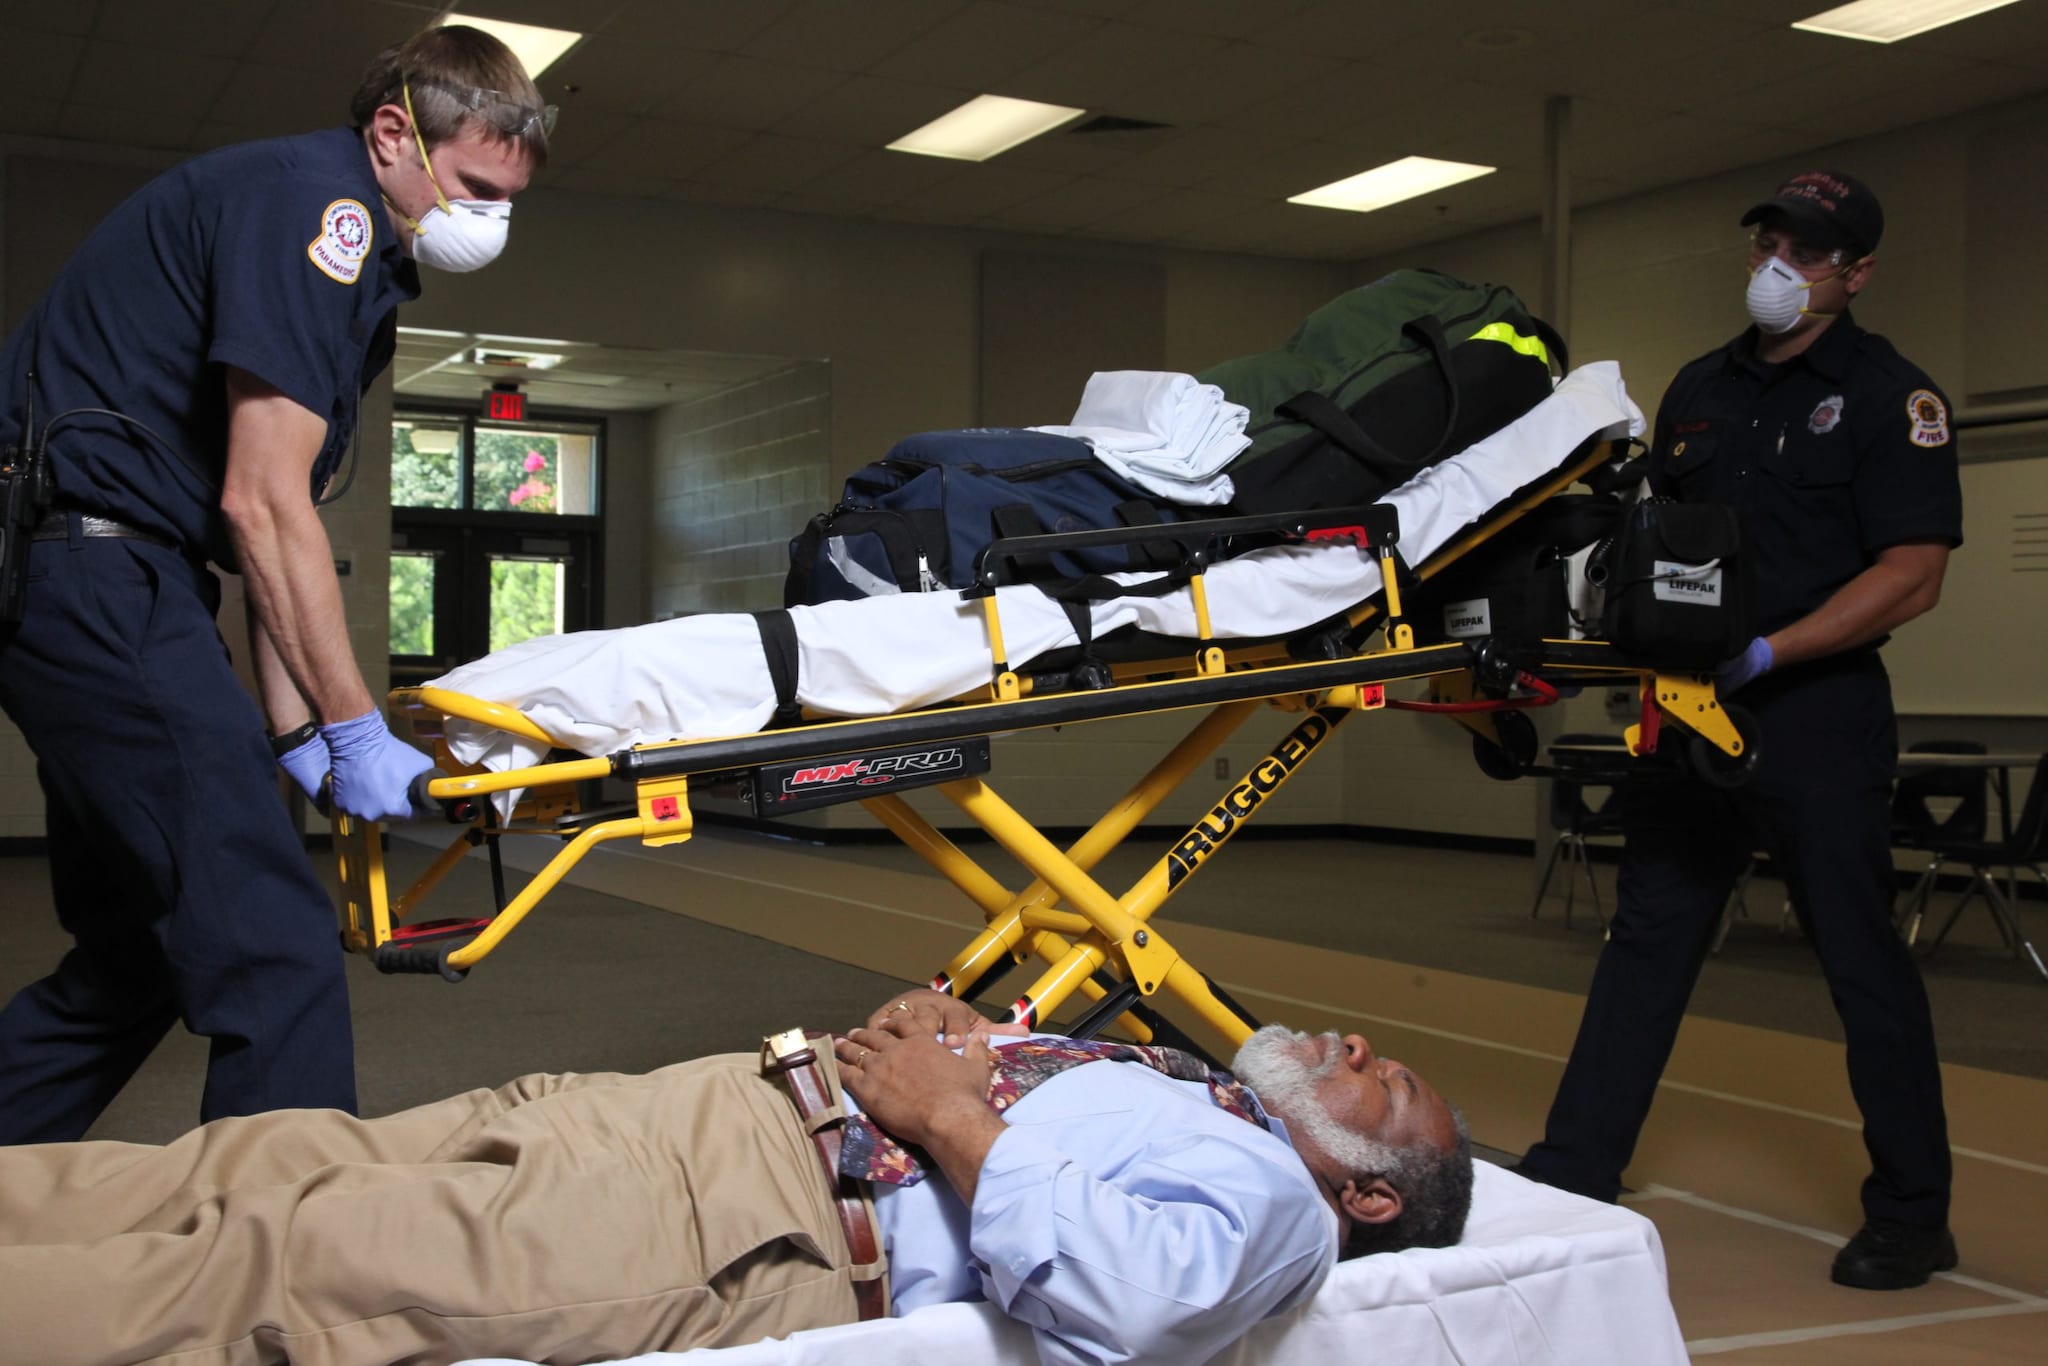 Emergency medical services responding assisting person lying on a cot on the floor inside a community reception center.